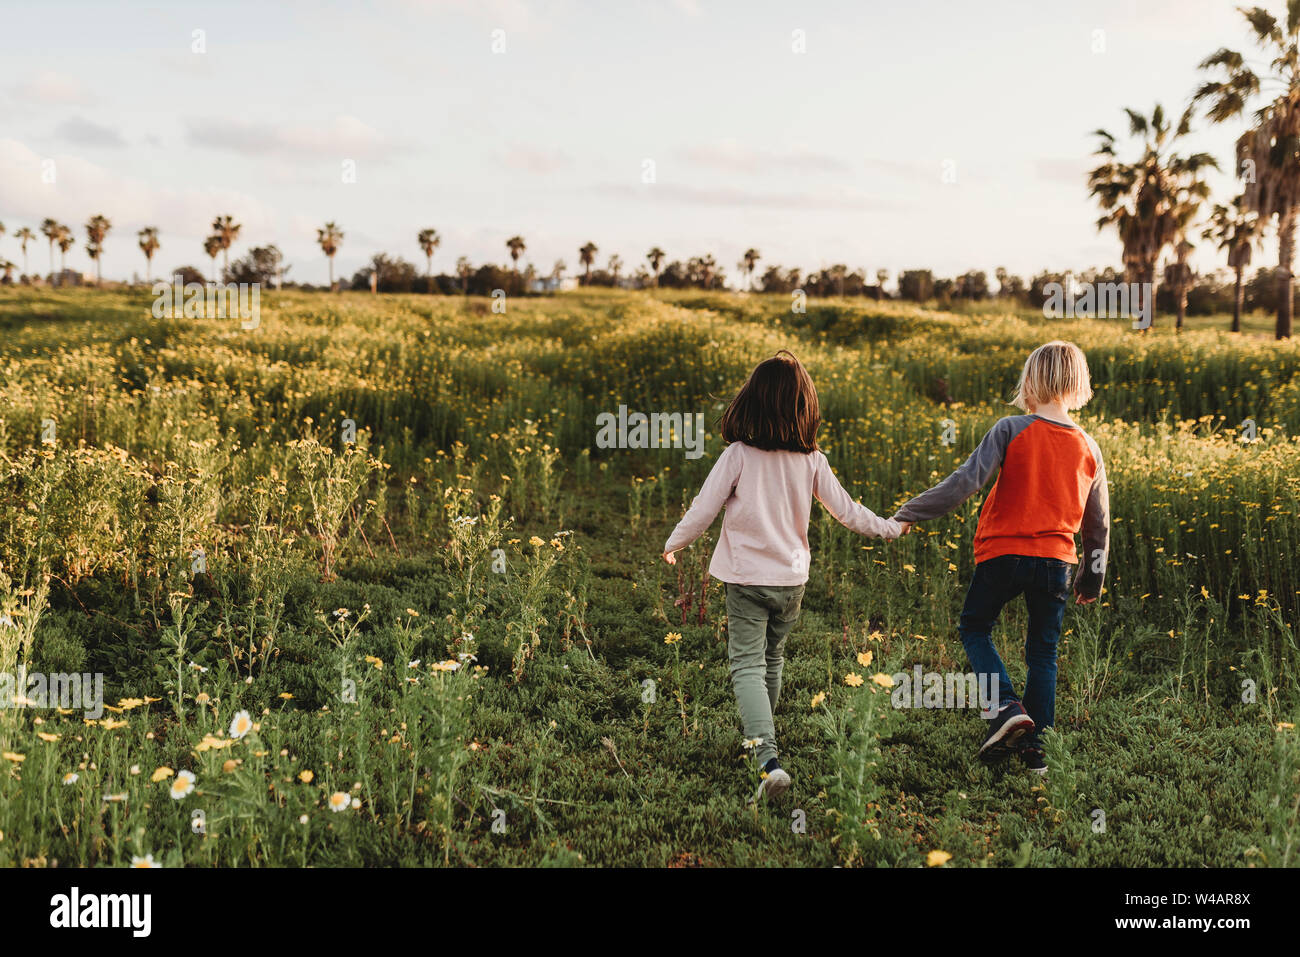 Little girl and boy holding hands walking away into a field Stock Photo